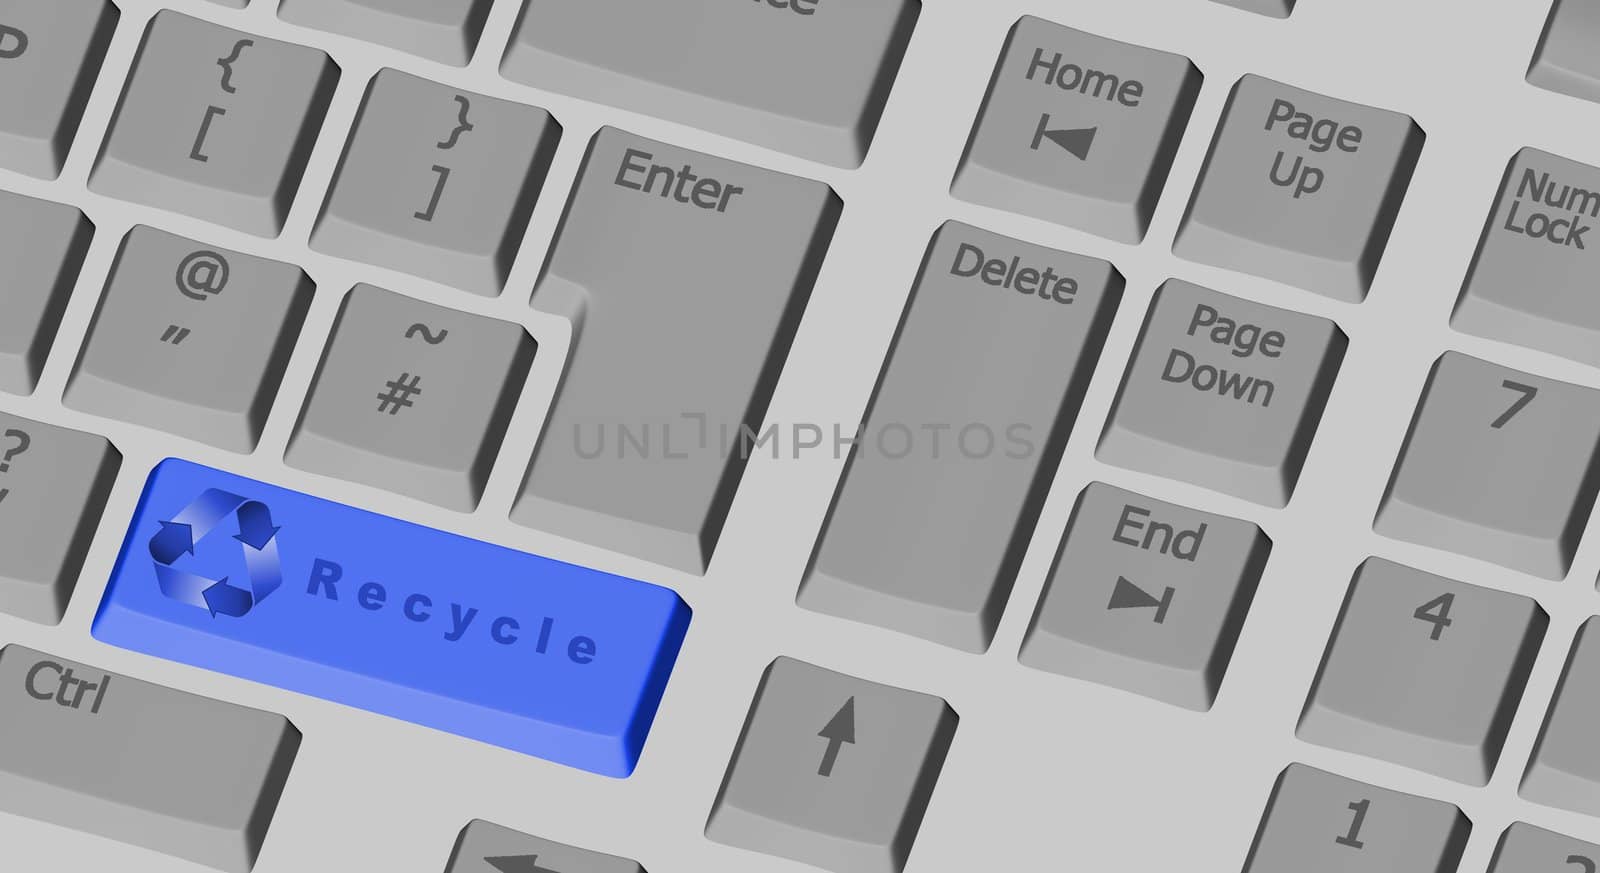 Recycle symbol on the computer keyboard in blue by marphotography